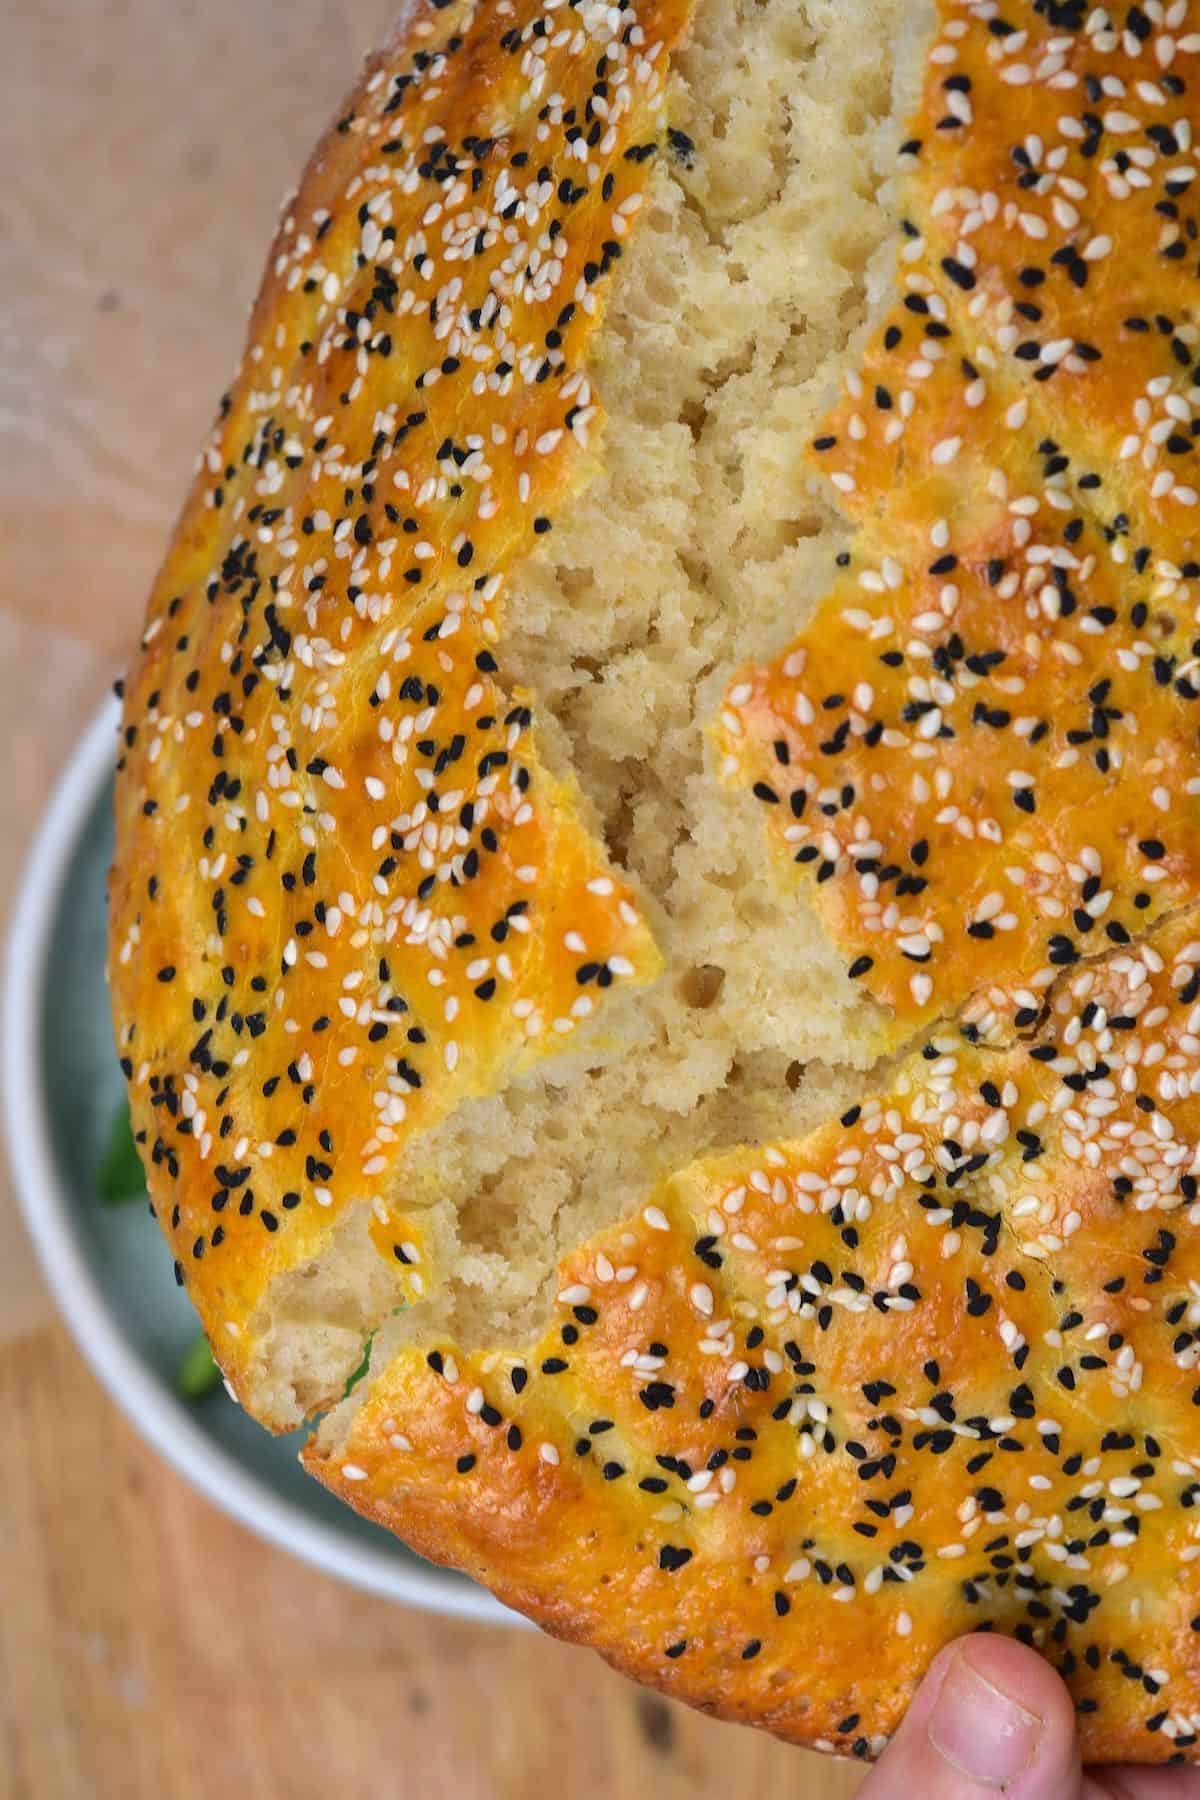 A close up of broken pide bread with nigella and white sesame seeds